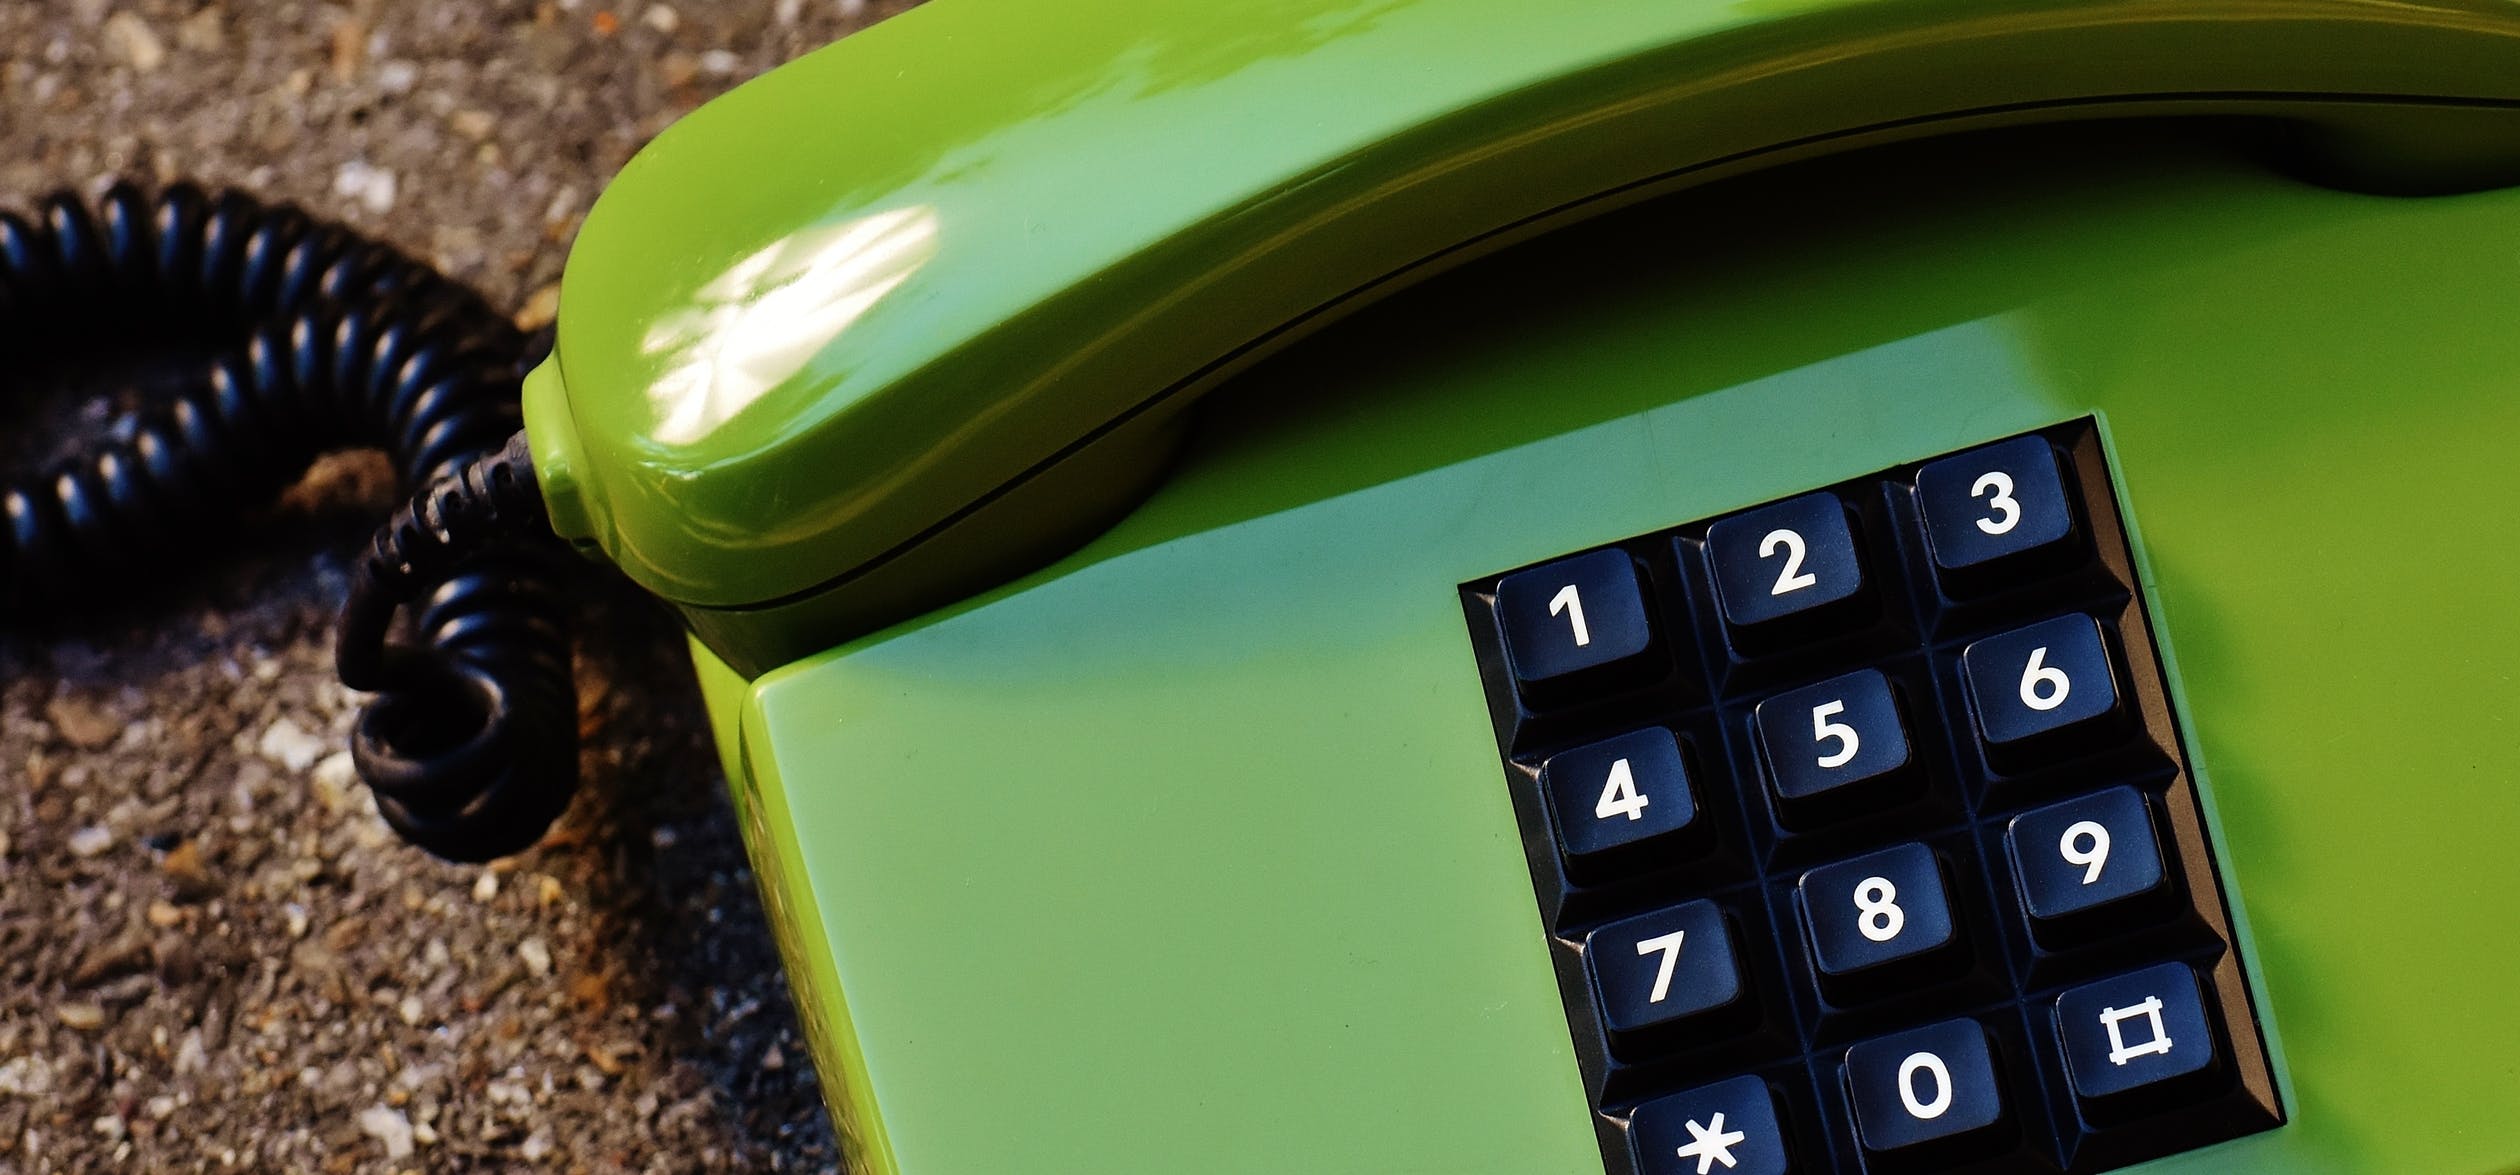 How can businesses benefit from toll-free numbers